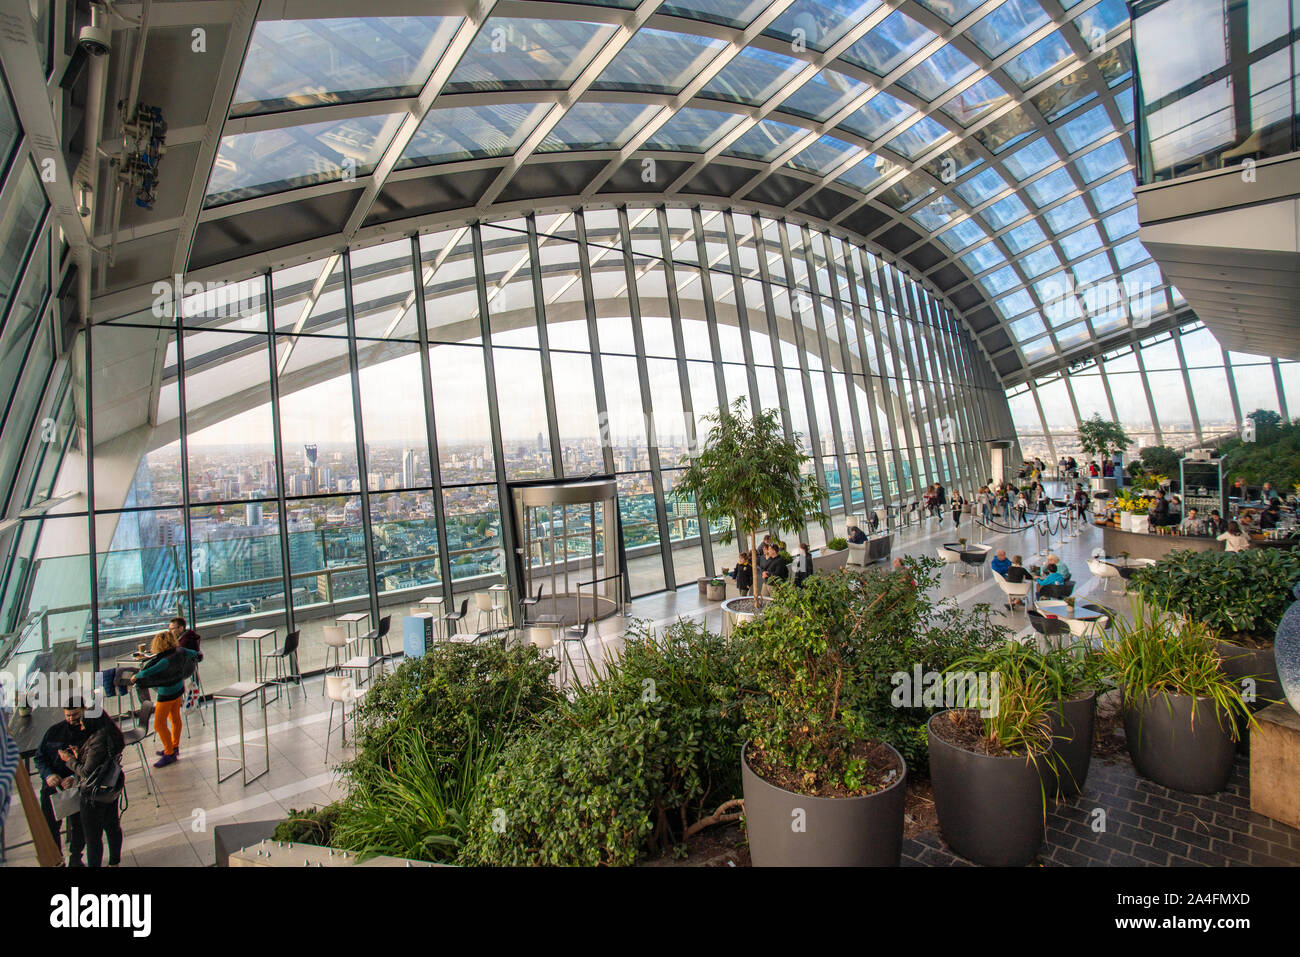 Sky garden with the skyline of london on the background Stock Photo